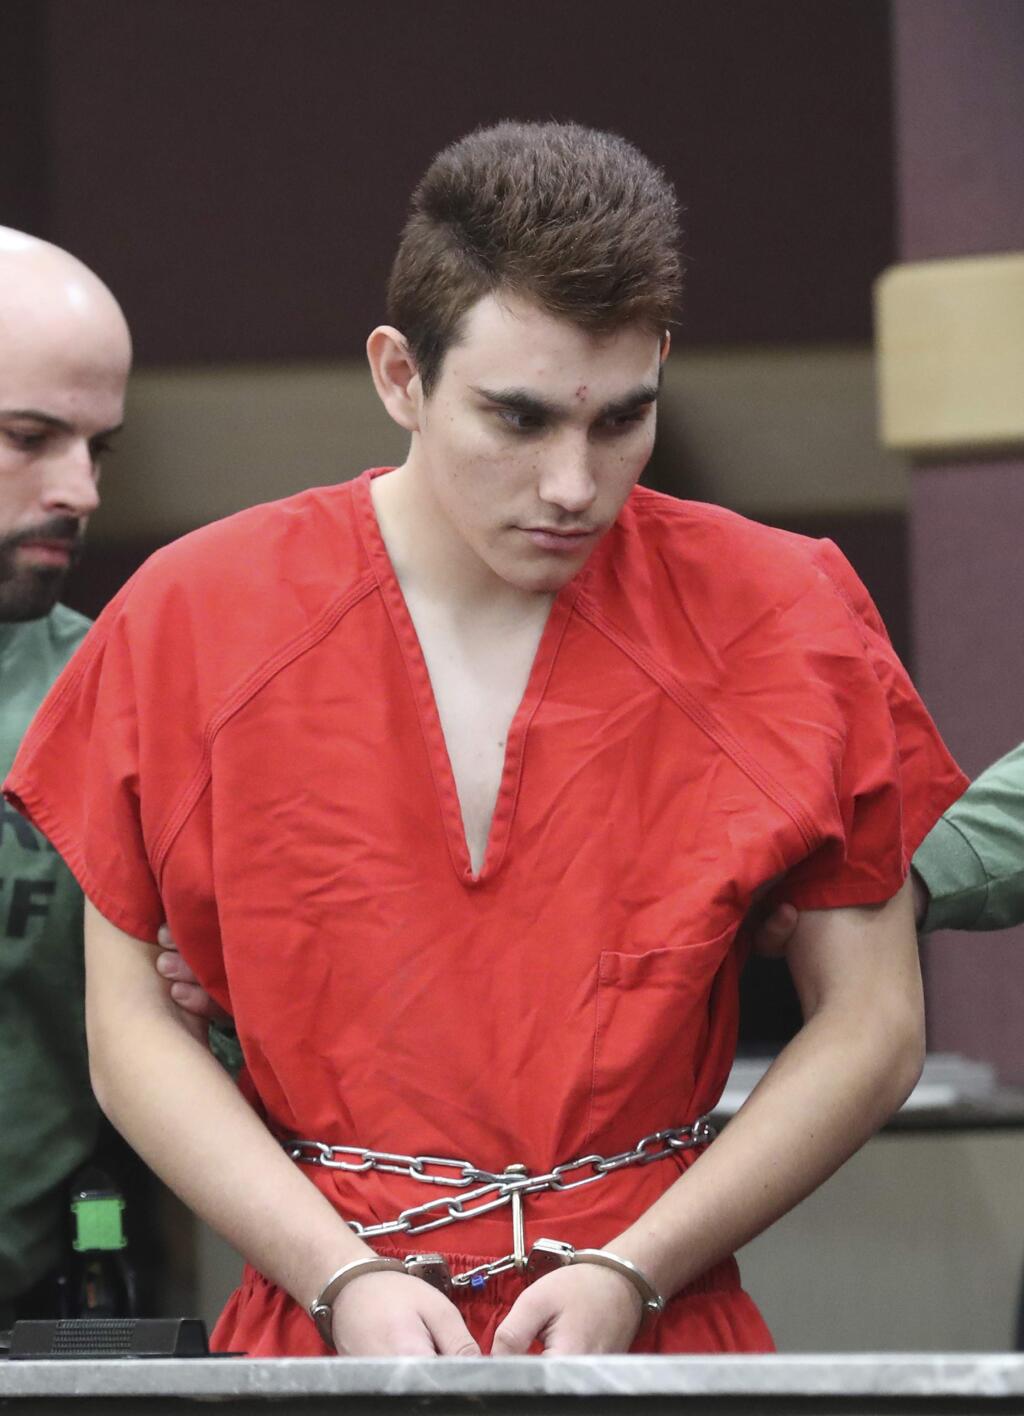 Nikolas Cruz is lead into the courtroom before being arraigned at the Broward County Courthouse in Fort Lauderdale, Fla., on Wednesday, March 14, 2018. Cruz is accused of opening fire at Marjory Stoneman Douglas High School in Parkland, Fla., Feb. 14, killing 17 students and adults. (Amy Beth Bennett/South Florida Sun-Sentinel via AP, Pool)